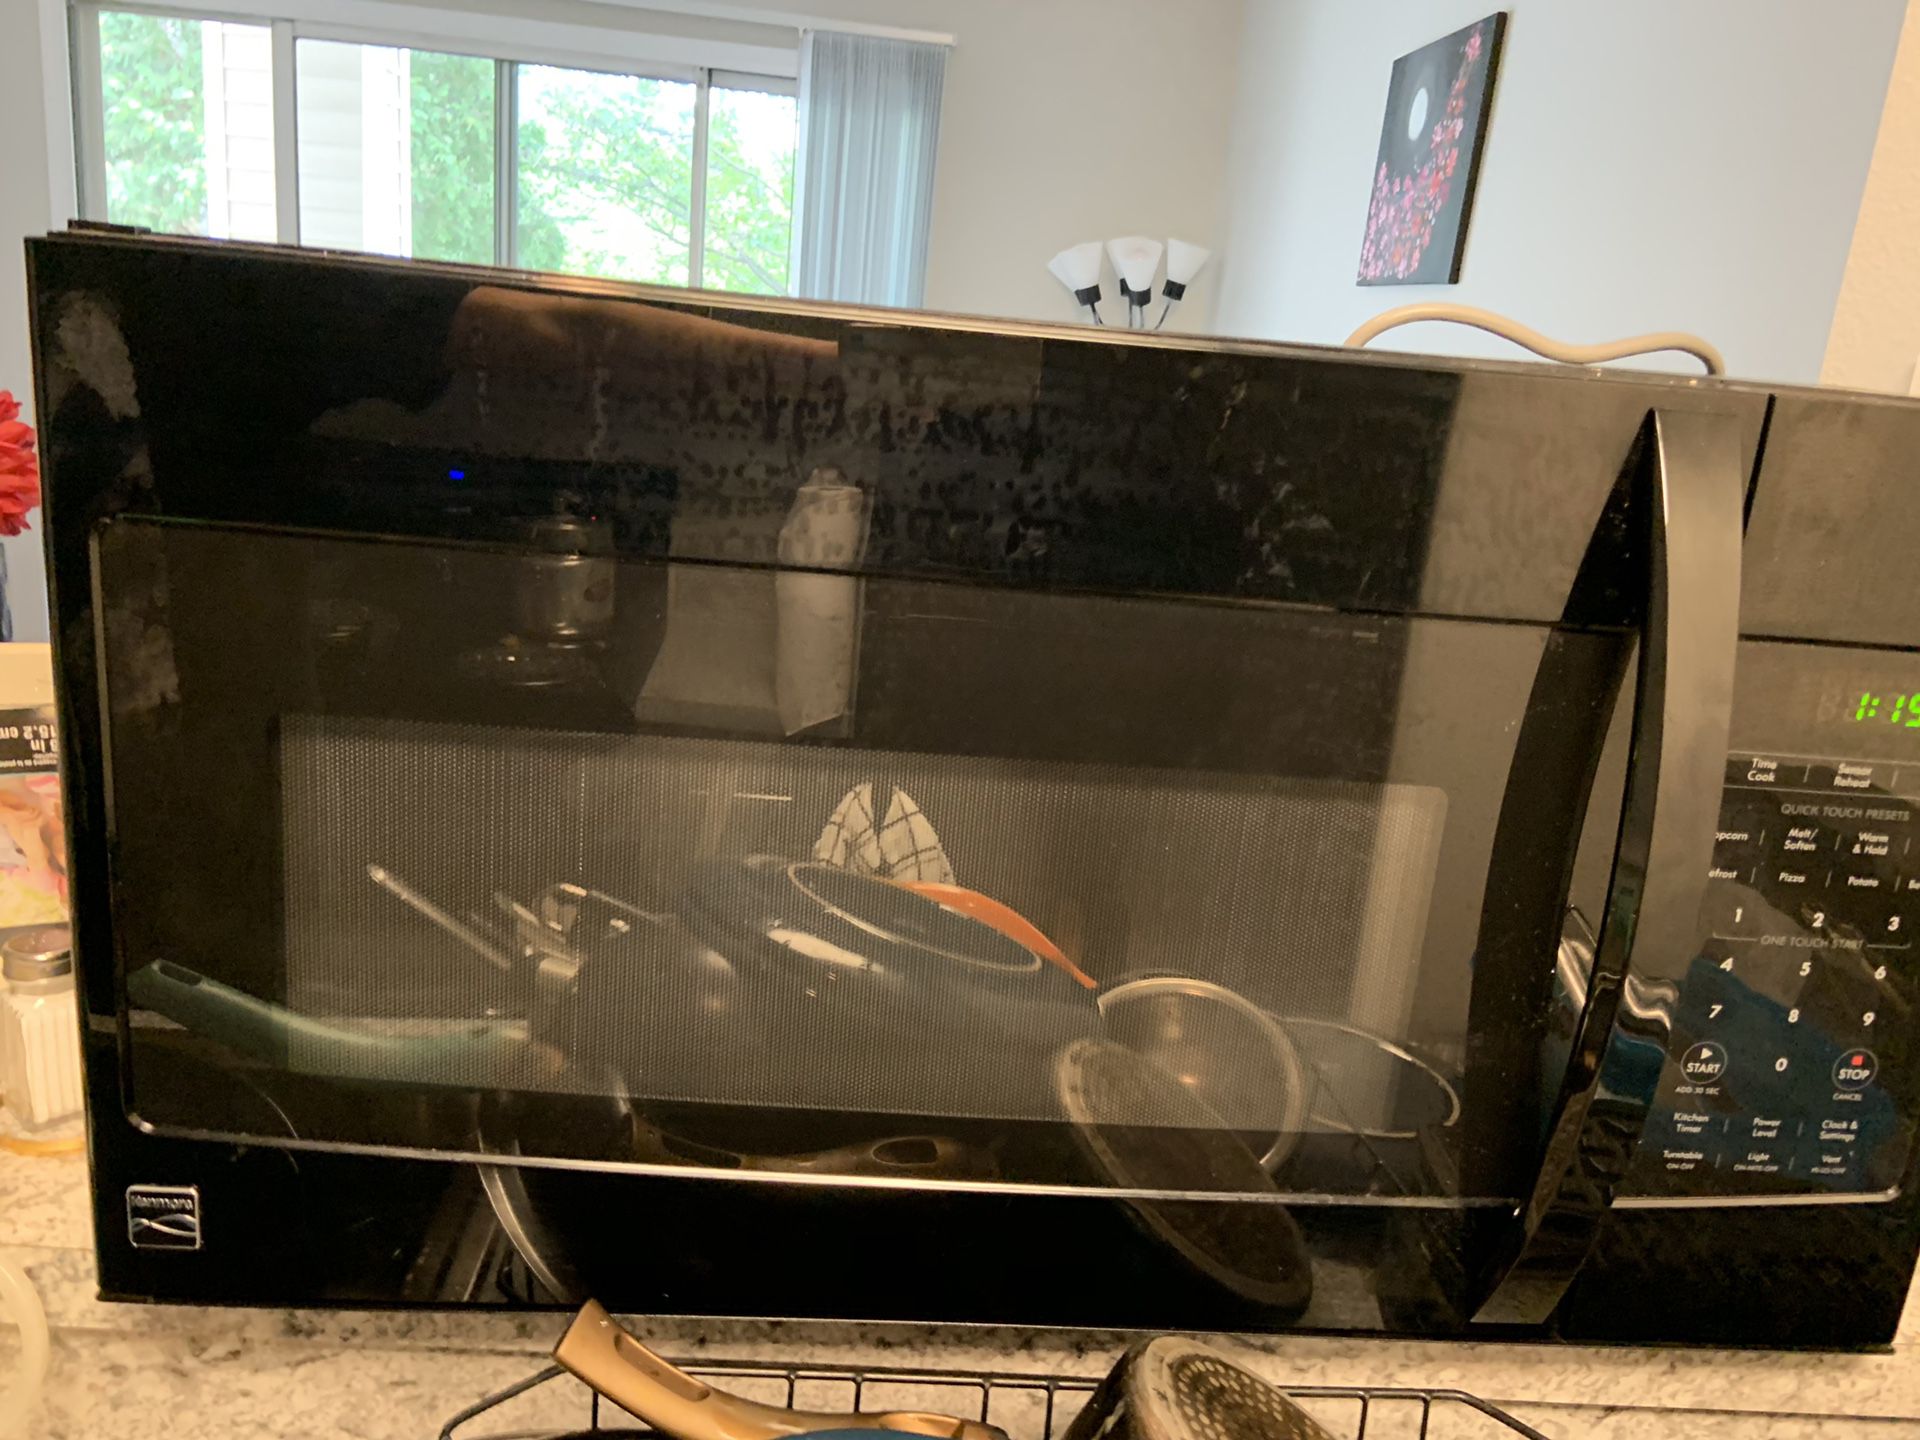 Microwave for $30. Big size. Pickup only.Briardale lane,Dublin Ohio